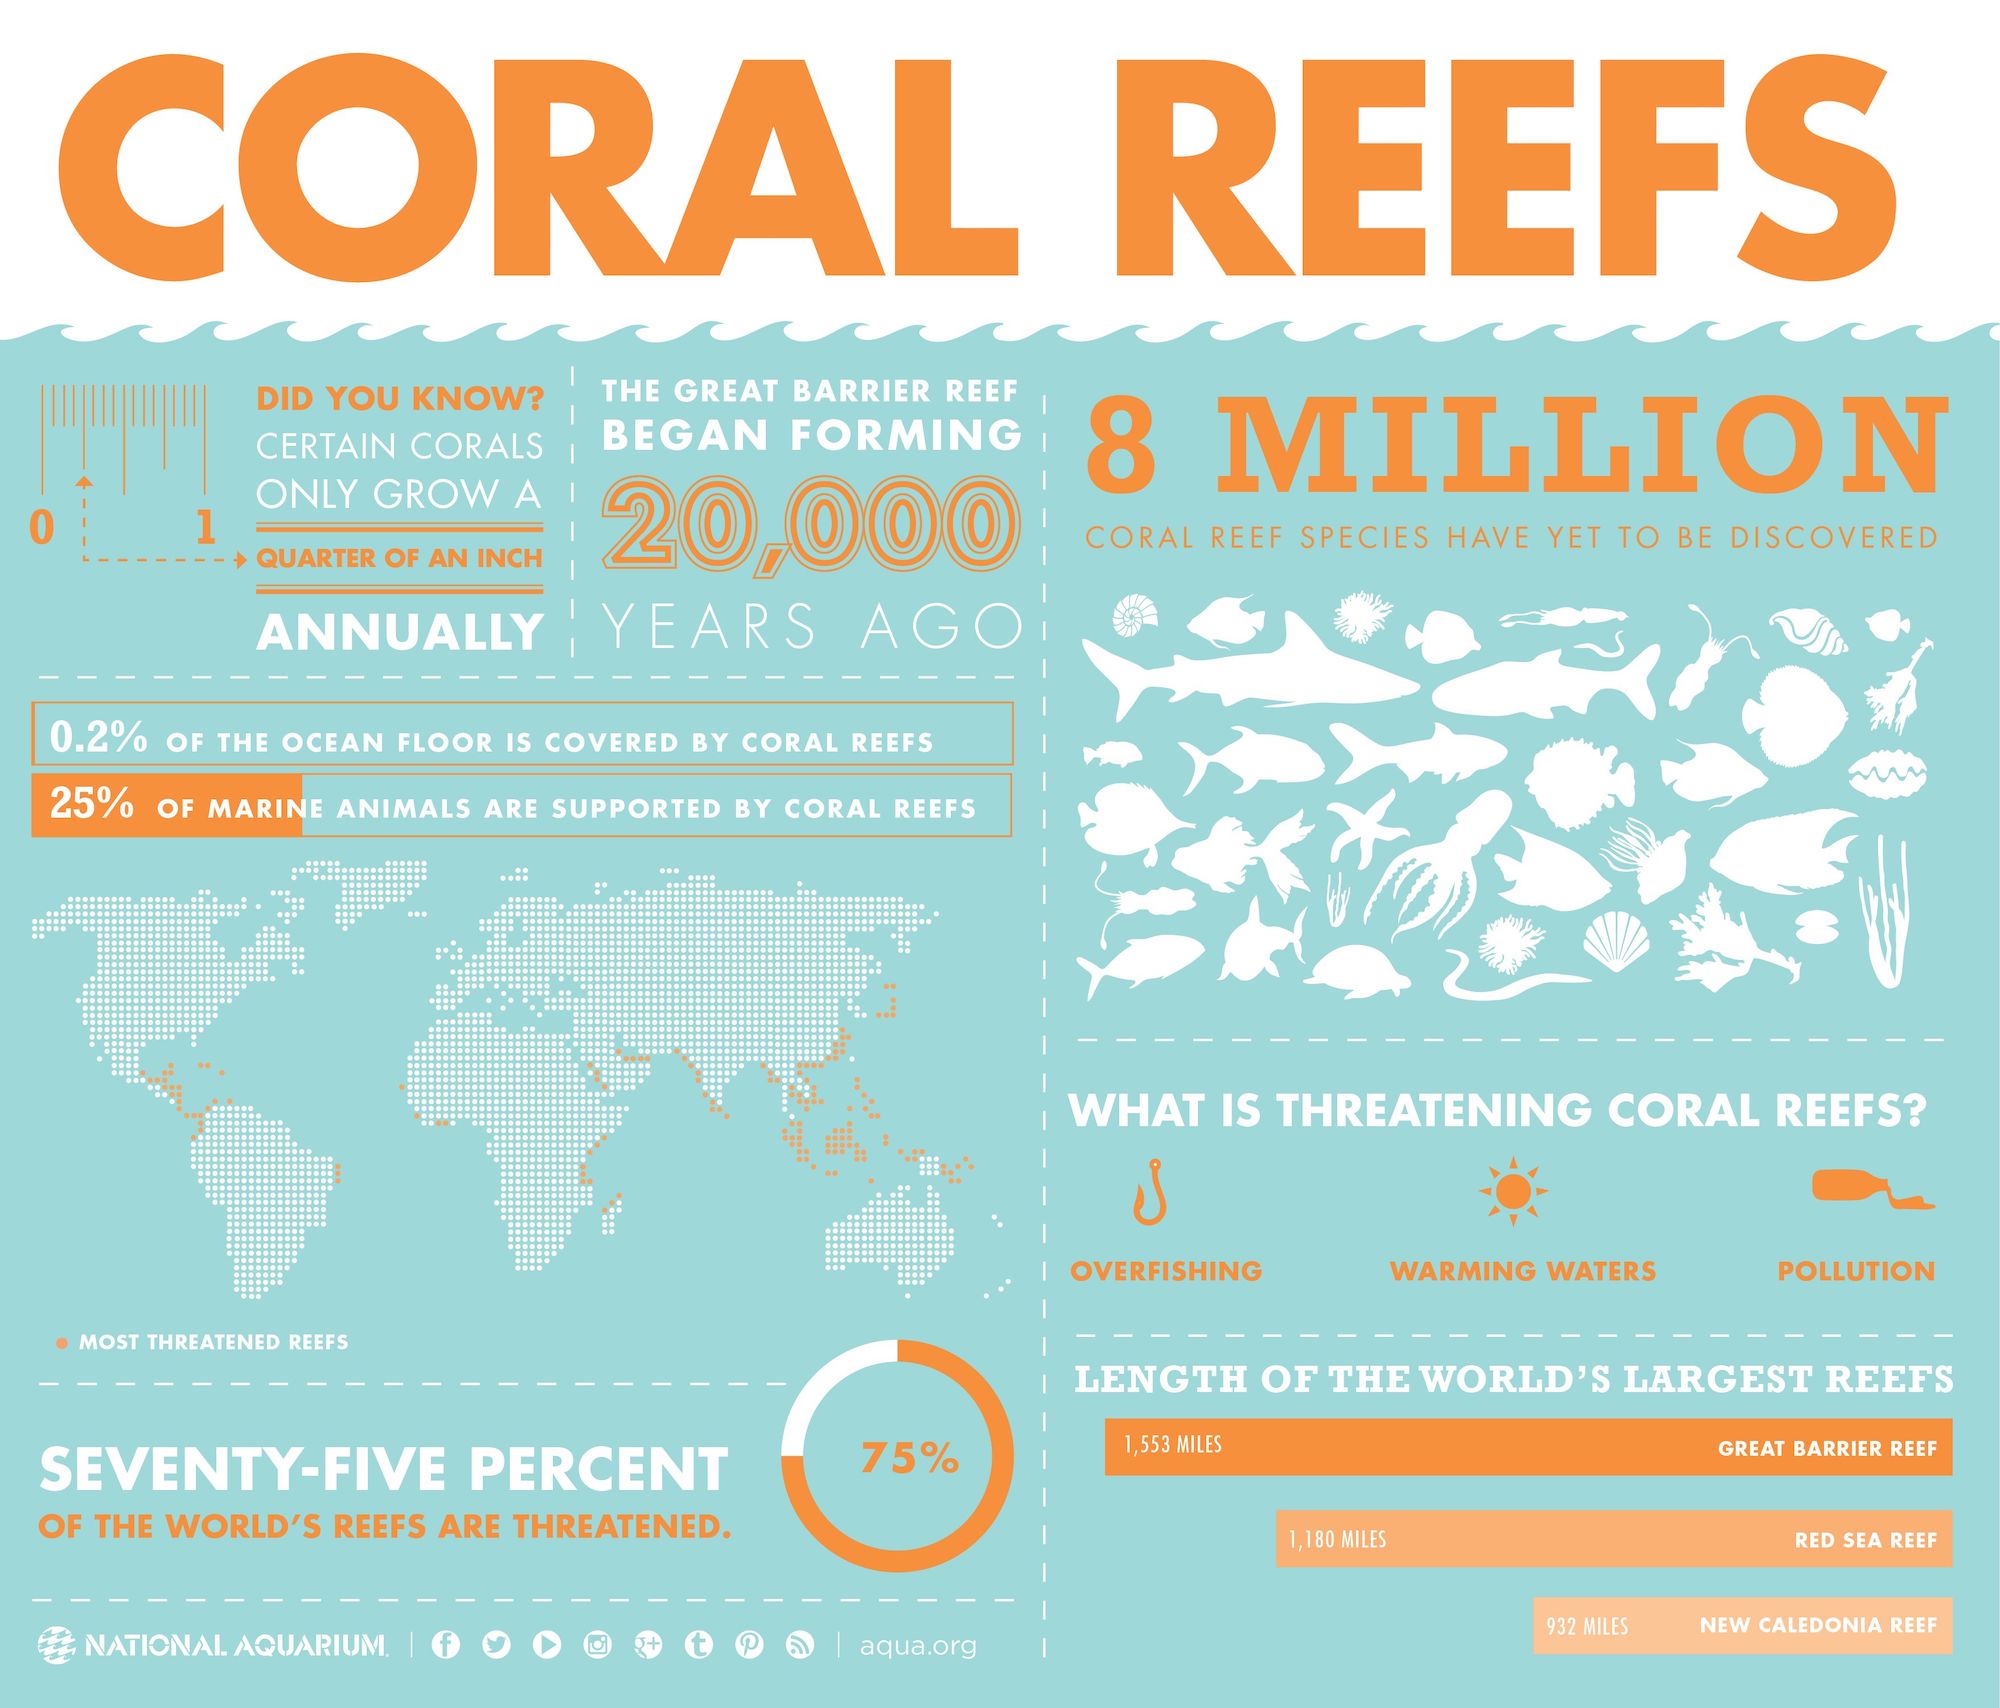 Why Should I Protect Coral Reefs?